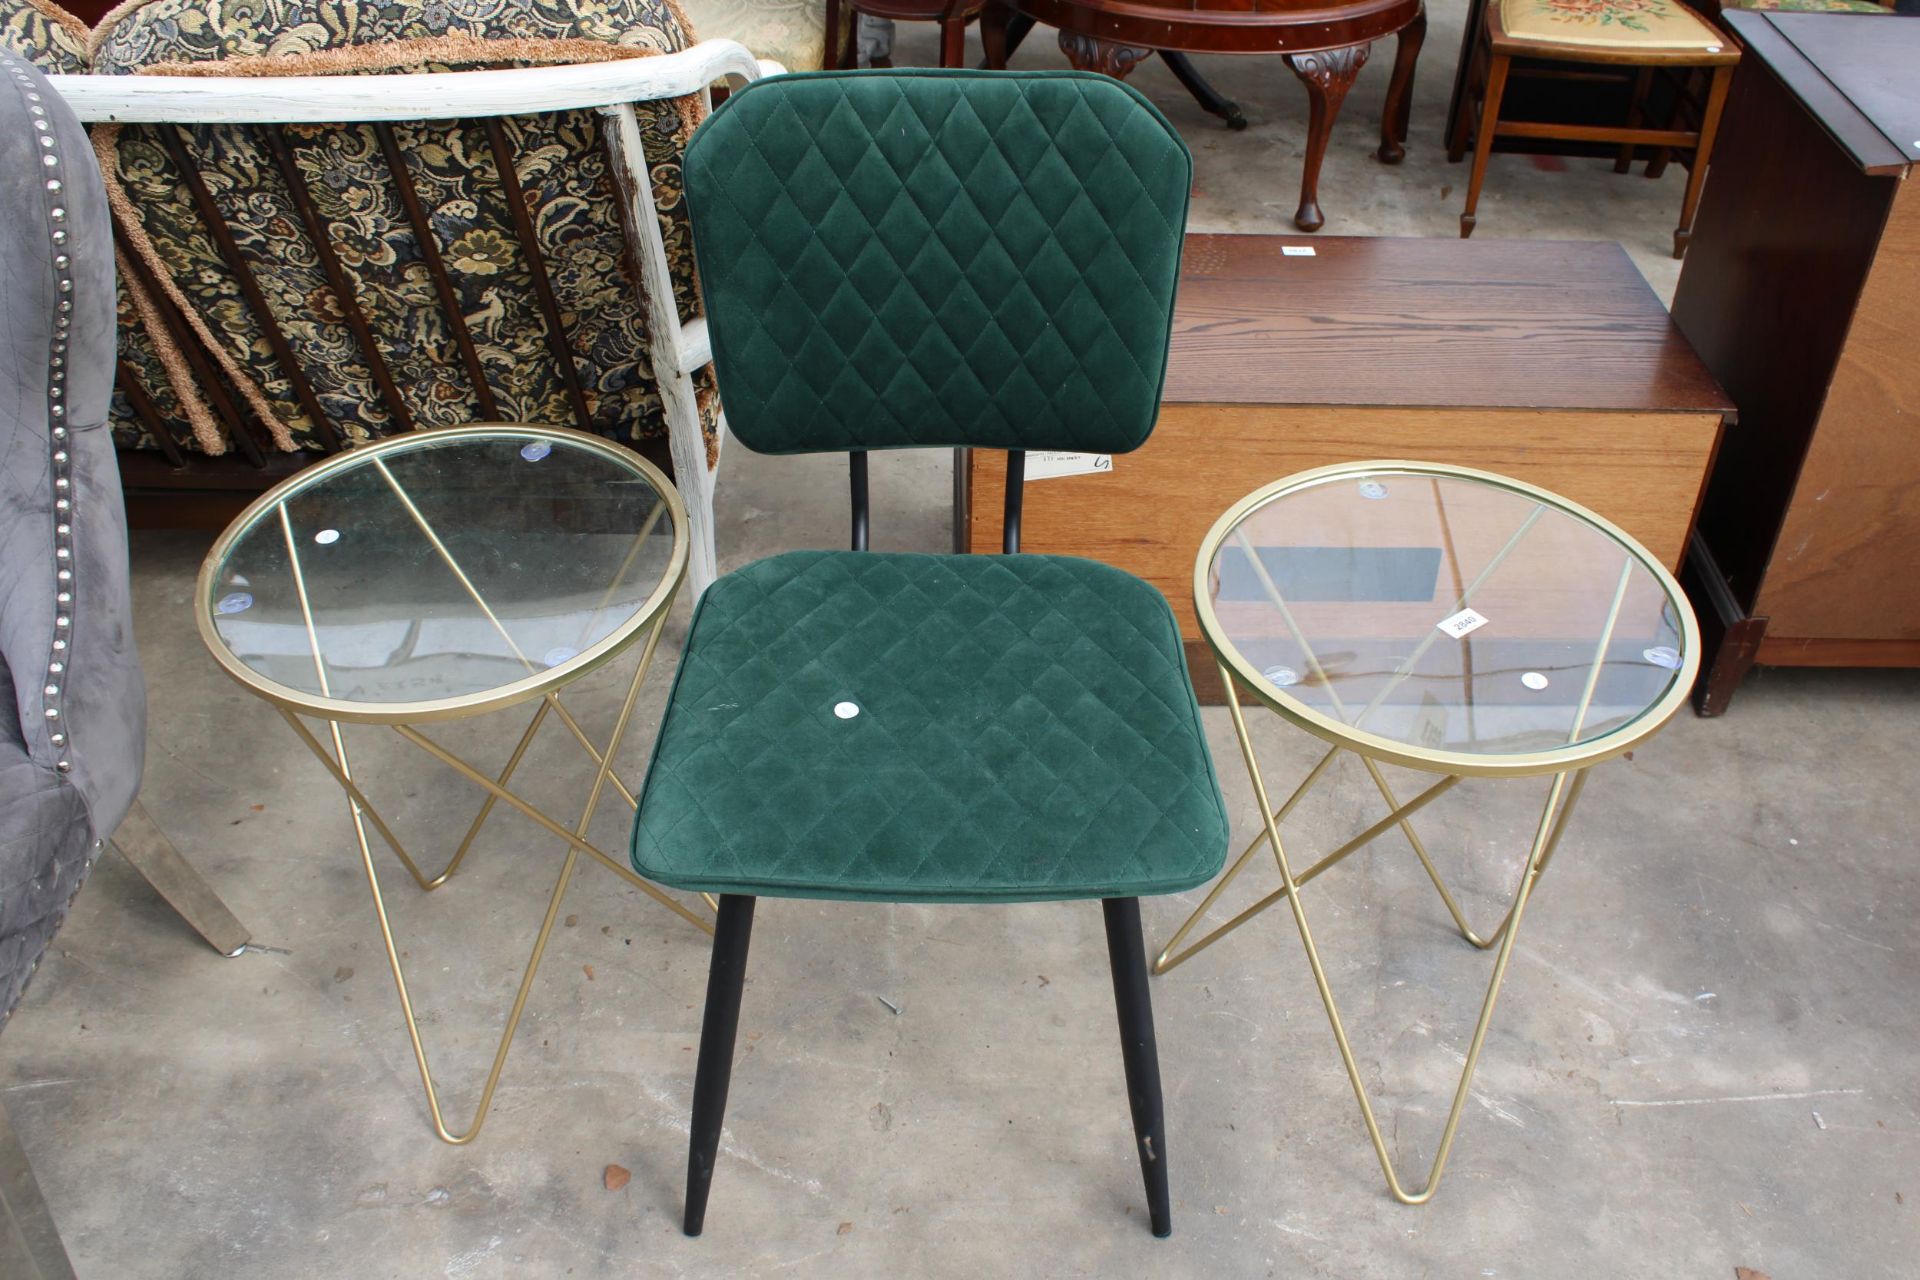 A PAIR OF 16" DIAMETER METAL FRAMED GLASS TOPPED OCCASIONAL TABLES AND DUNELM UPHOLSTERED DINING